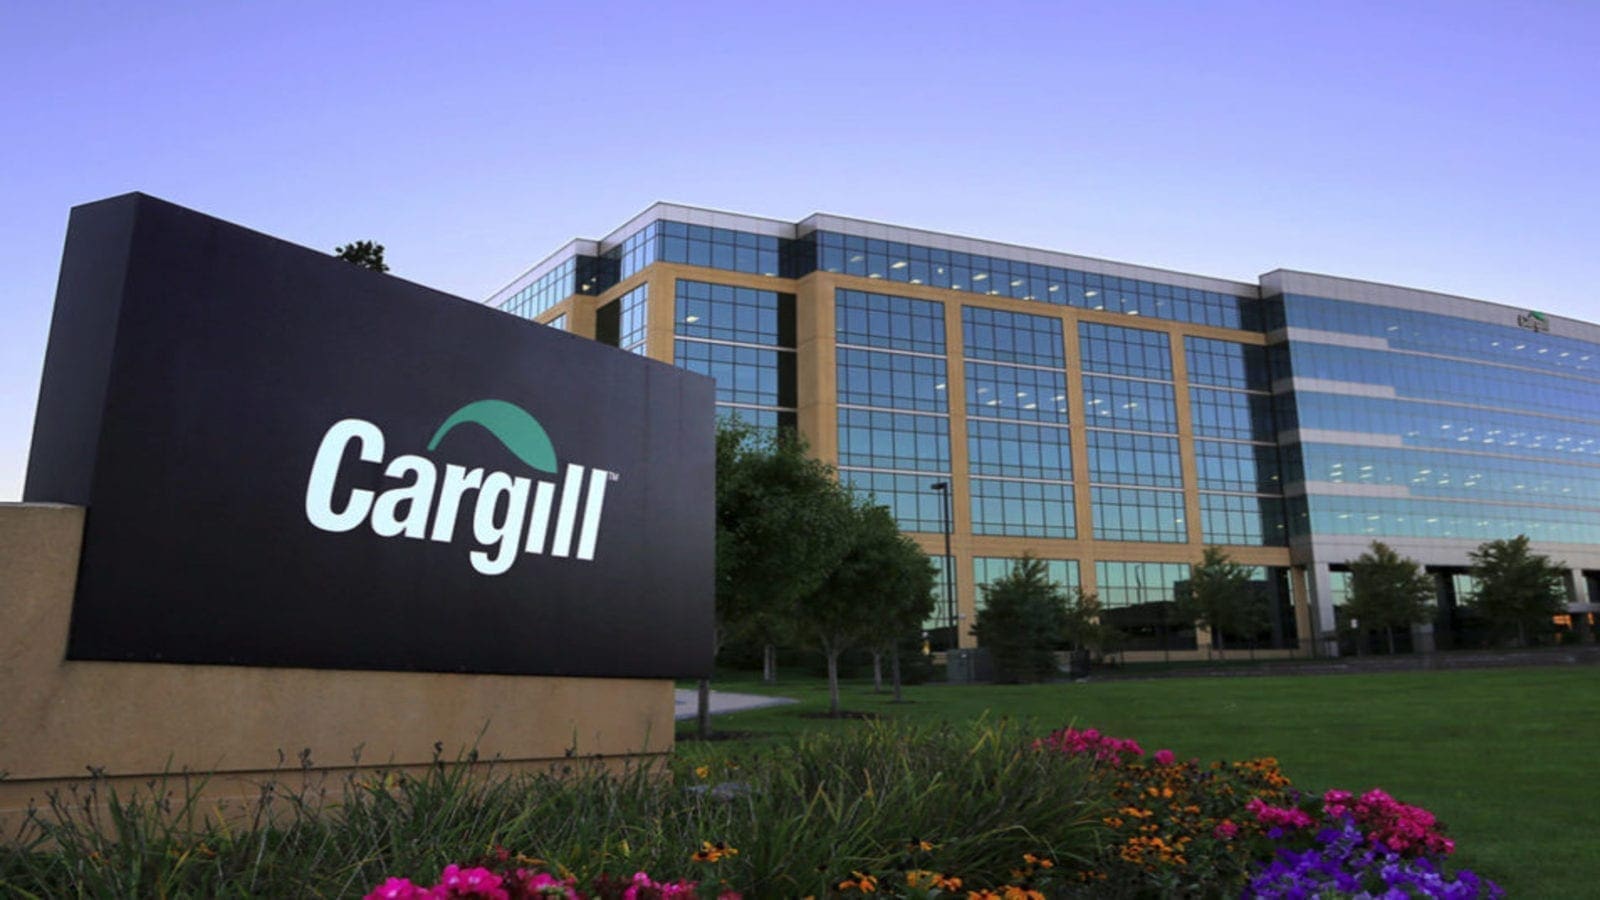 Cargill invests in life sciences venture capital fund to bolster health solutions portfolio